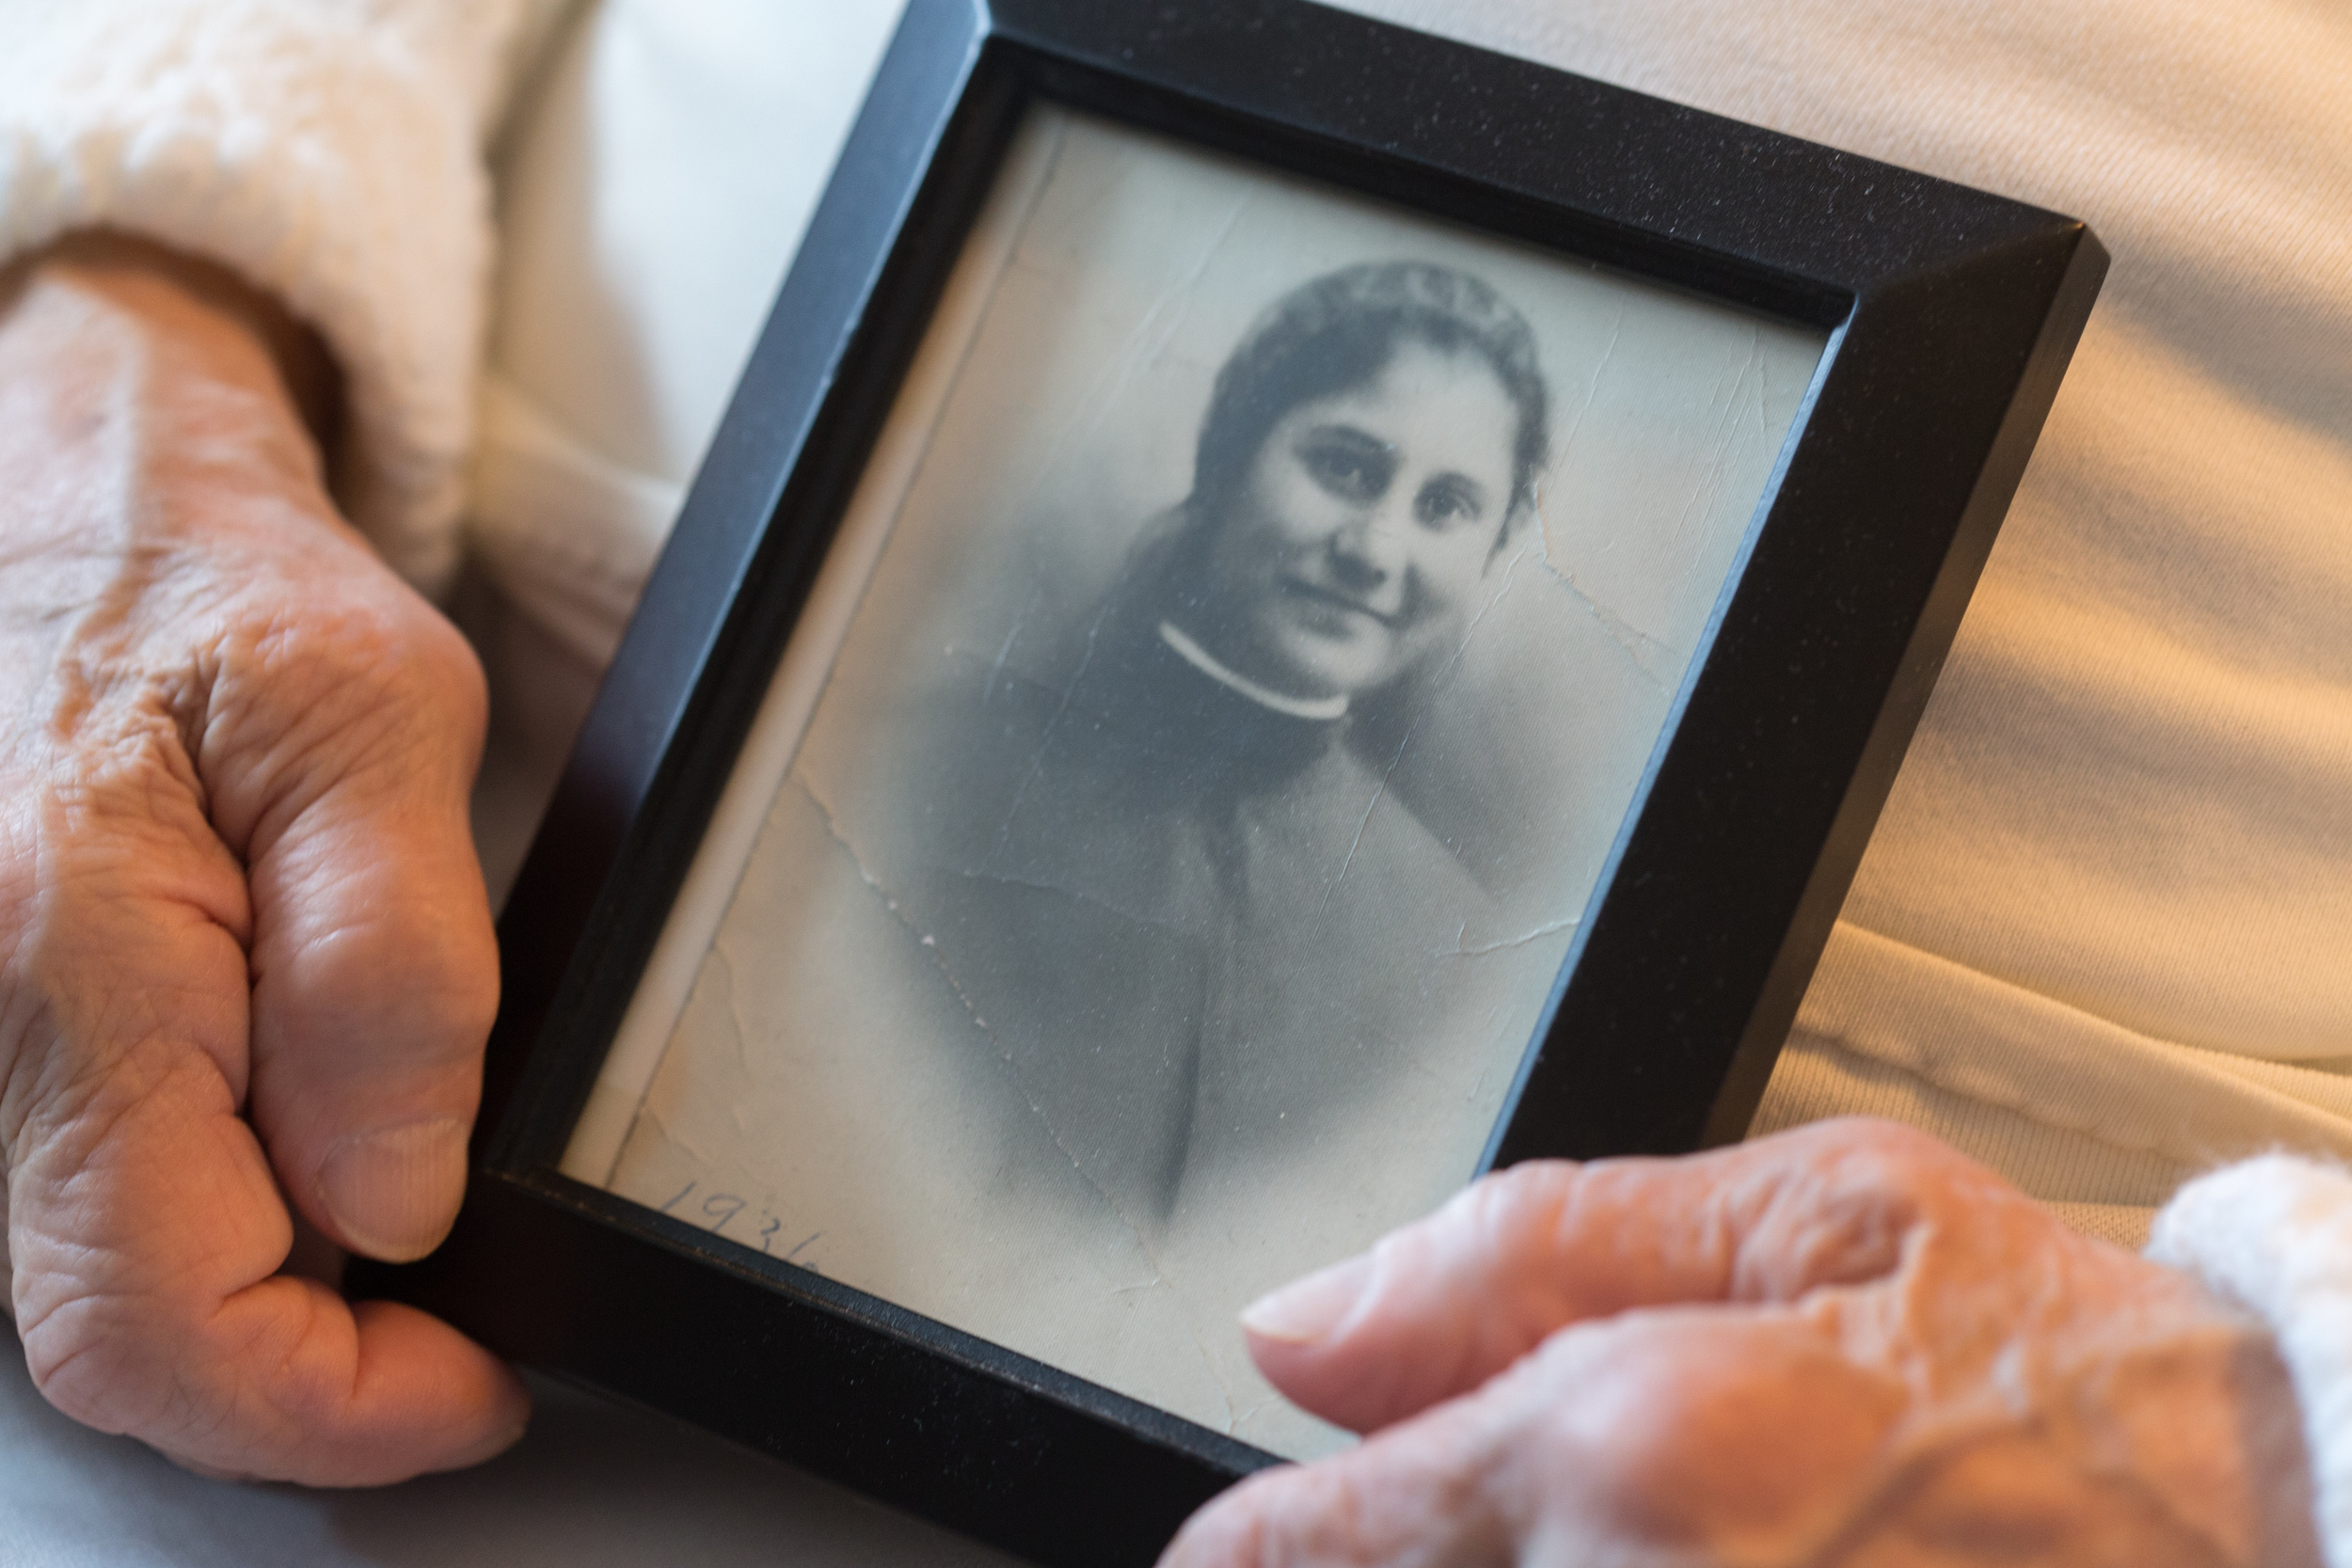  Inspired by her teacher, the news of Sr. Mary’s religious vocation hit her family like a bomb when she at thirteen said, “Today I want to leave and become a nun.” Her shocked mother replied, “You will never make it two weeks!” It’s been 78 years sin